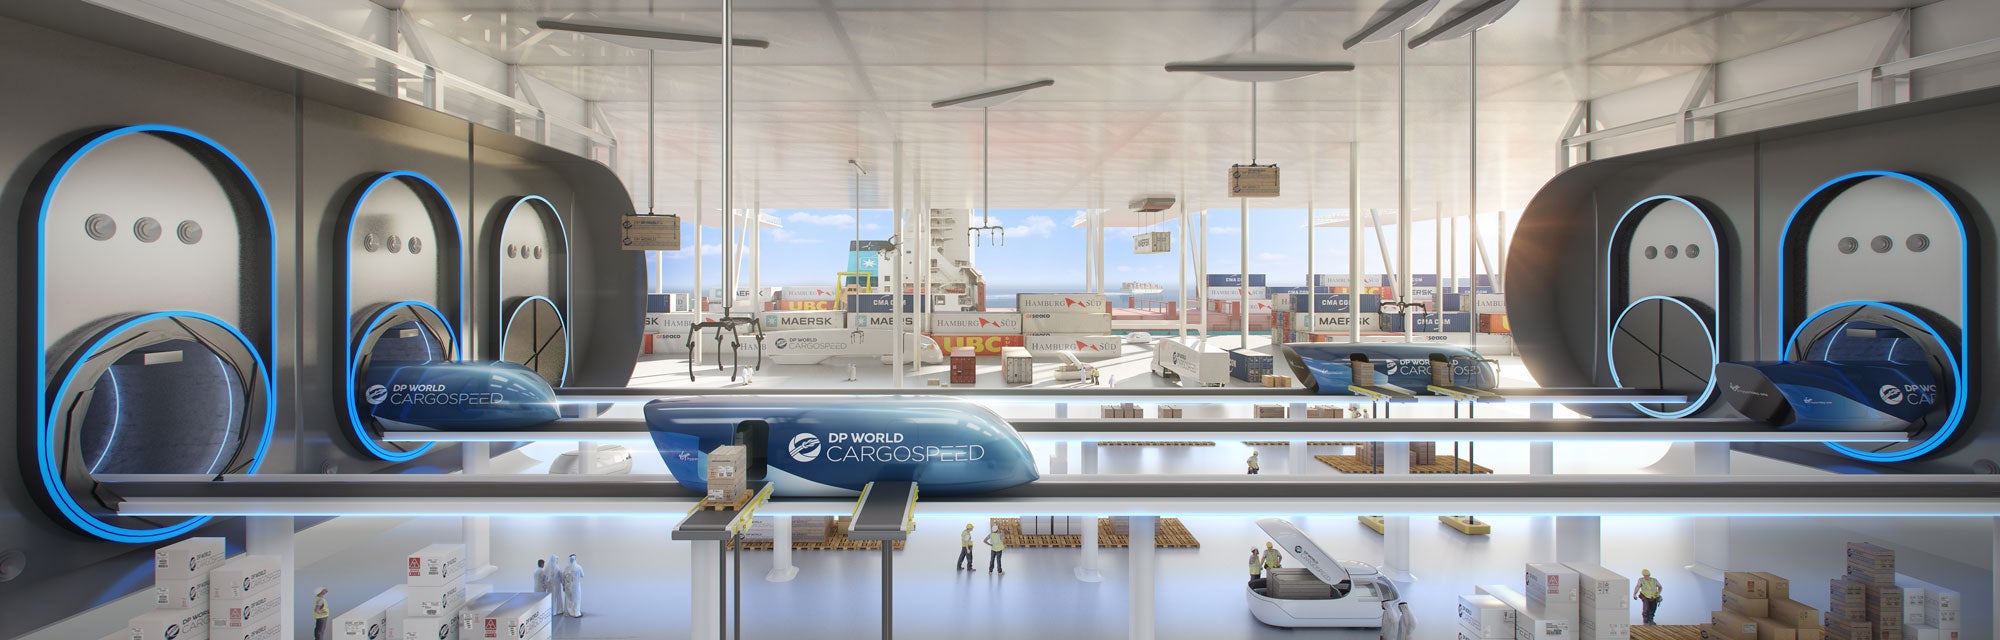 Is freight a pipe dream for Virgin Hyperloop?